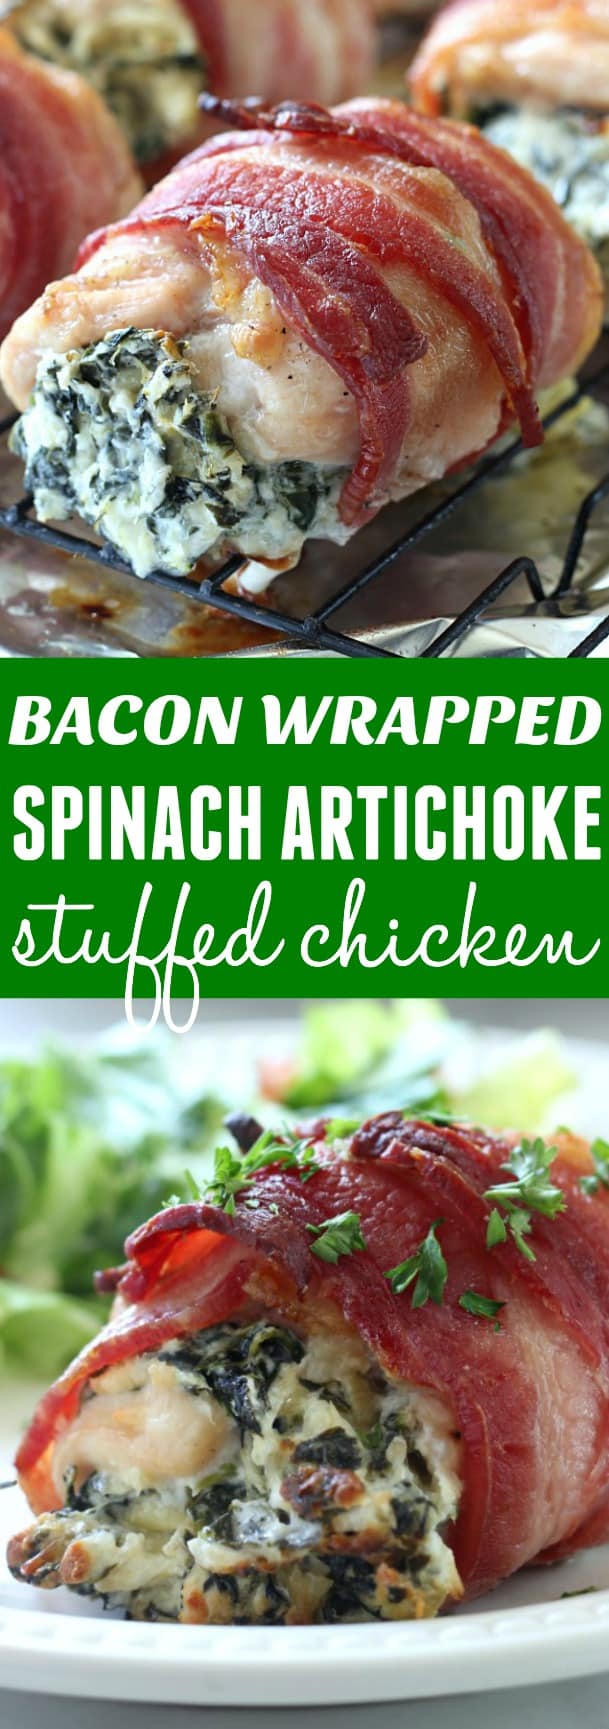 A close up chicken wrapped in bacon and filled with spinach